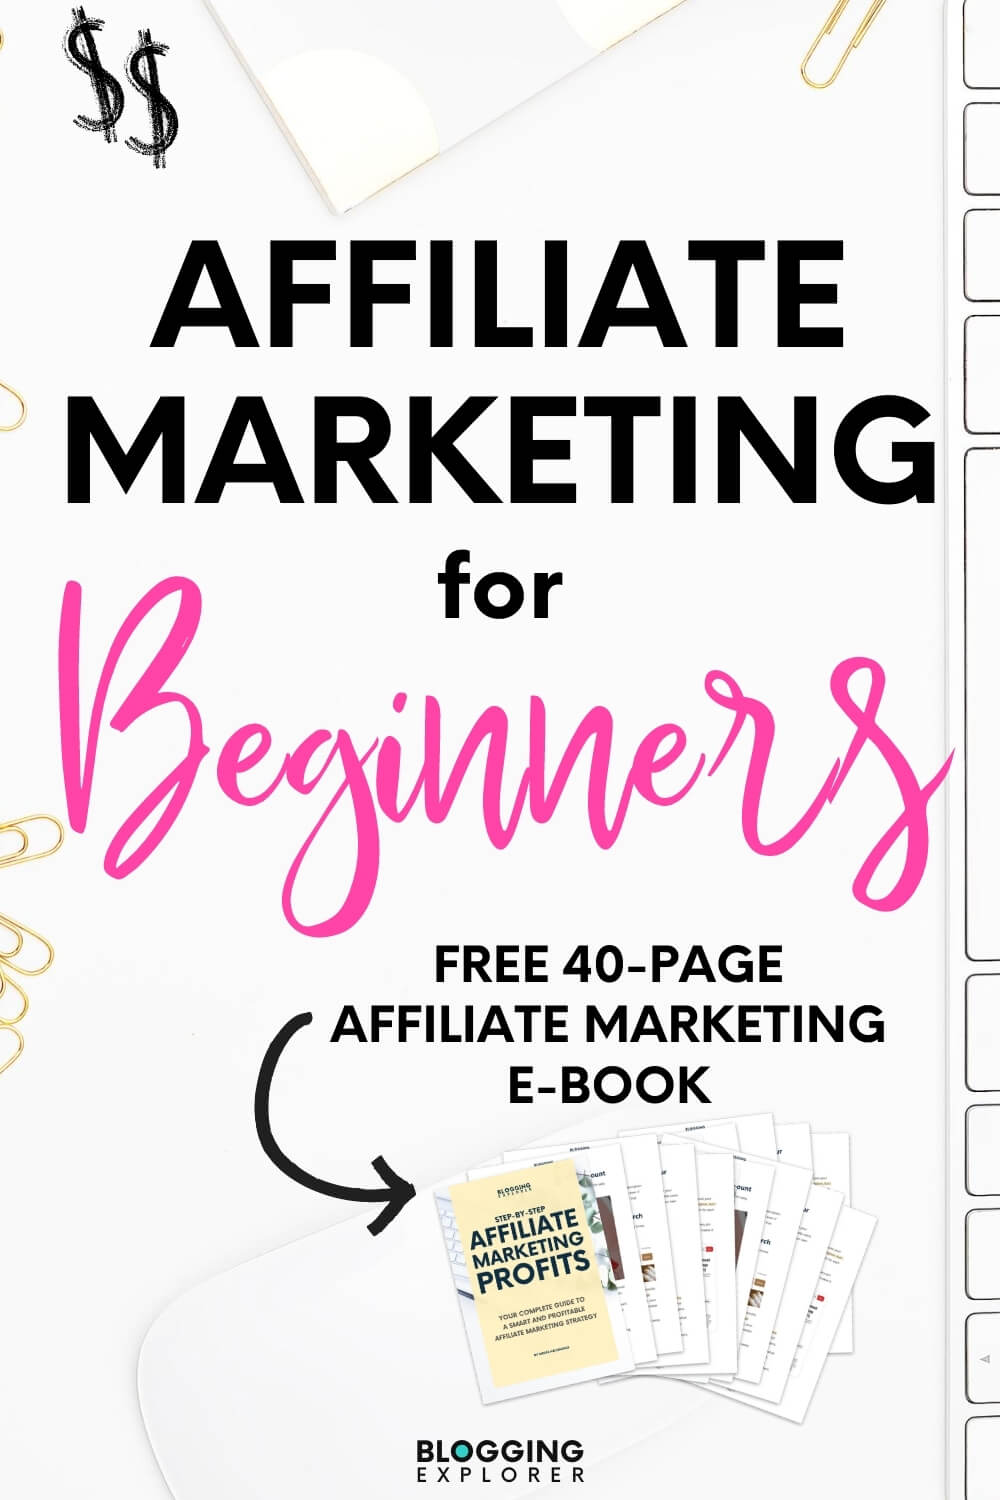 Affiliate Marketing for Dummies in 2022: How to Make Money Step-by-Step